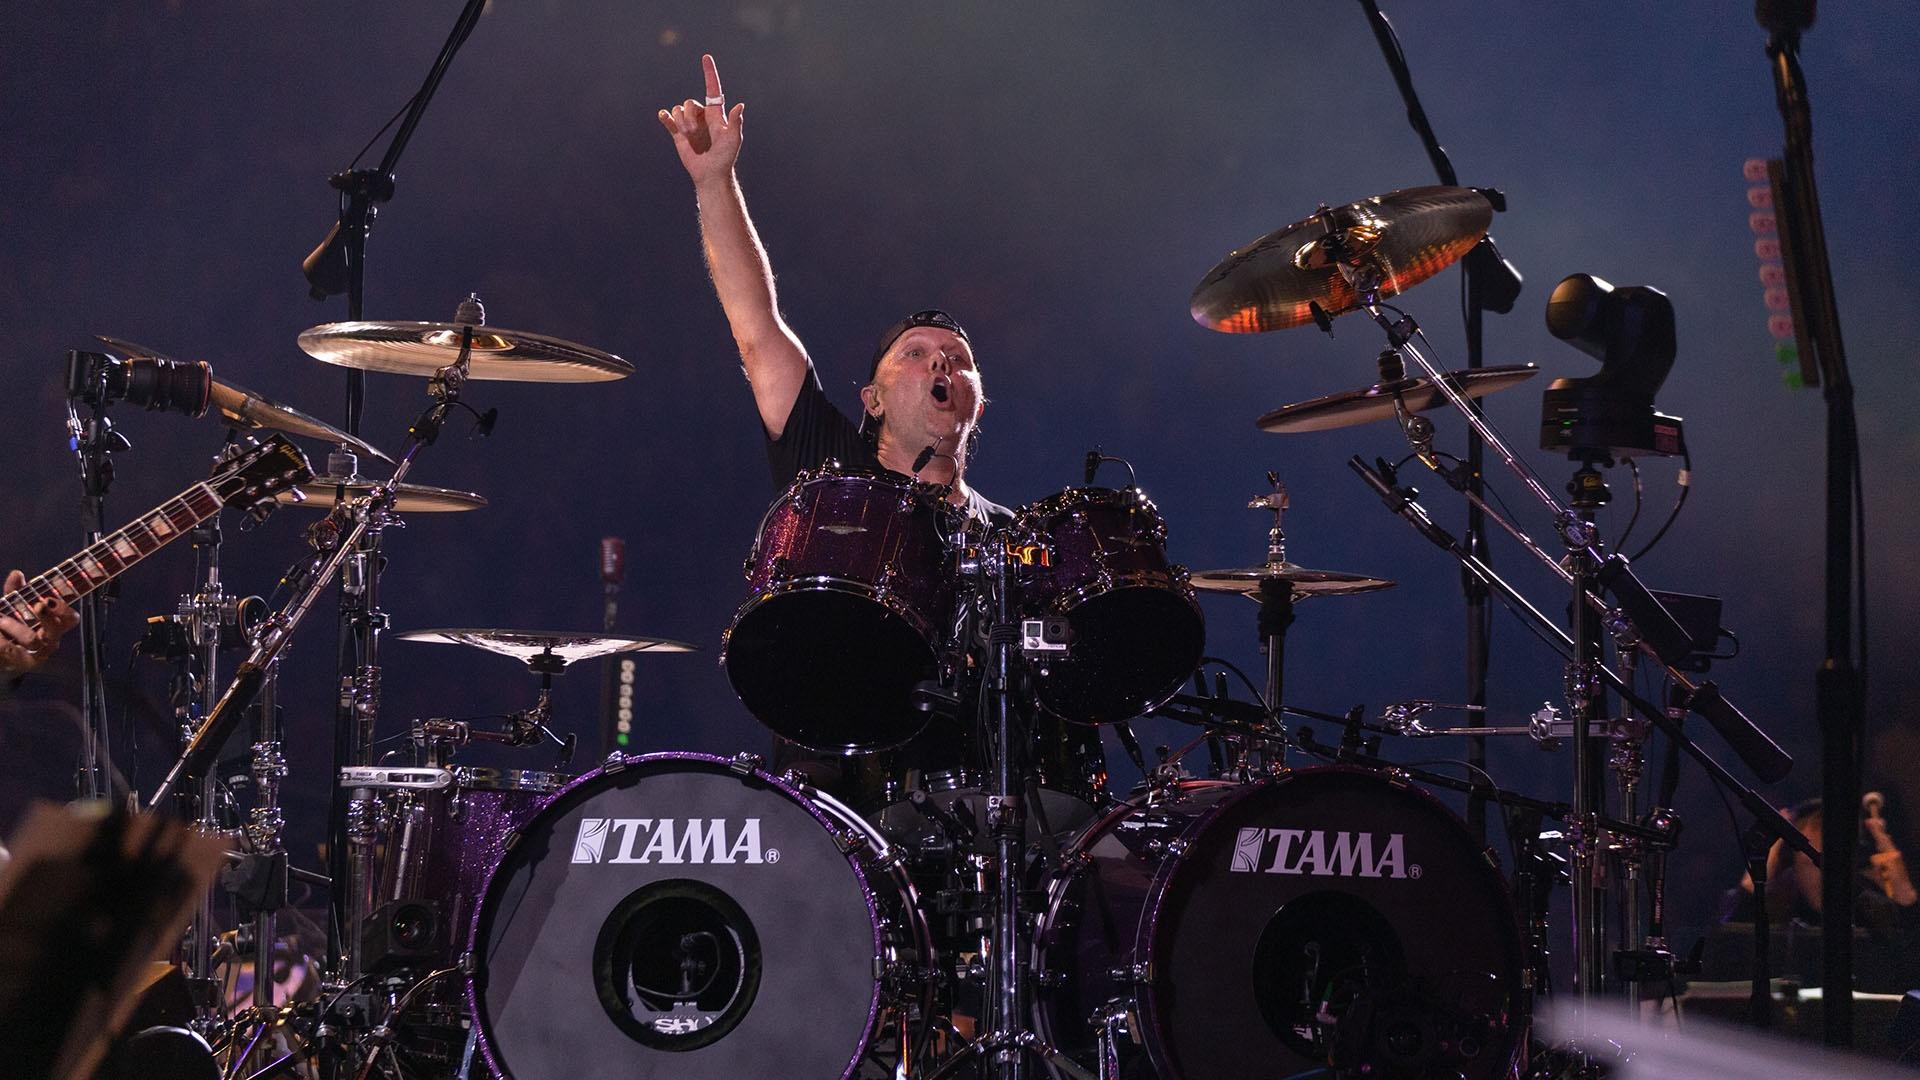 Lars Ulrich, drummer and co-founder of Metallica on stage.